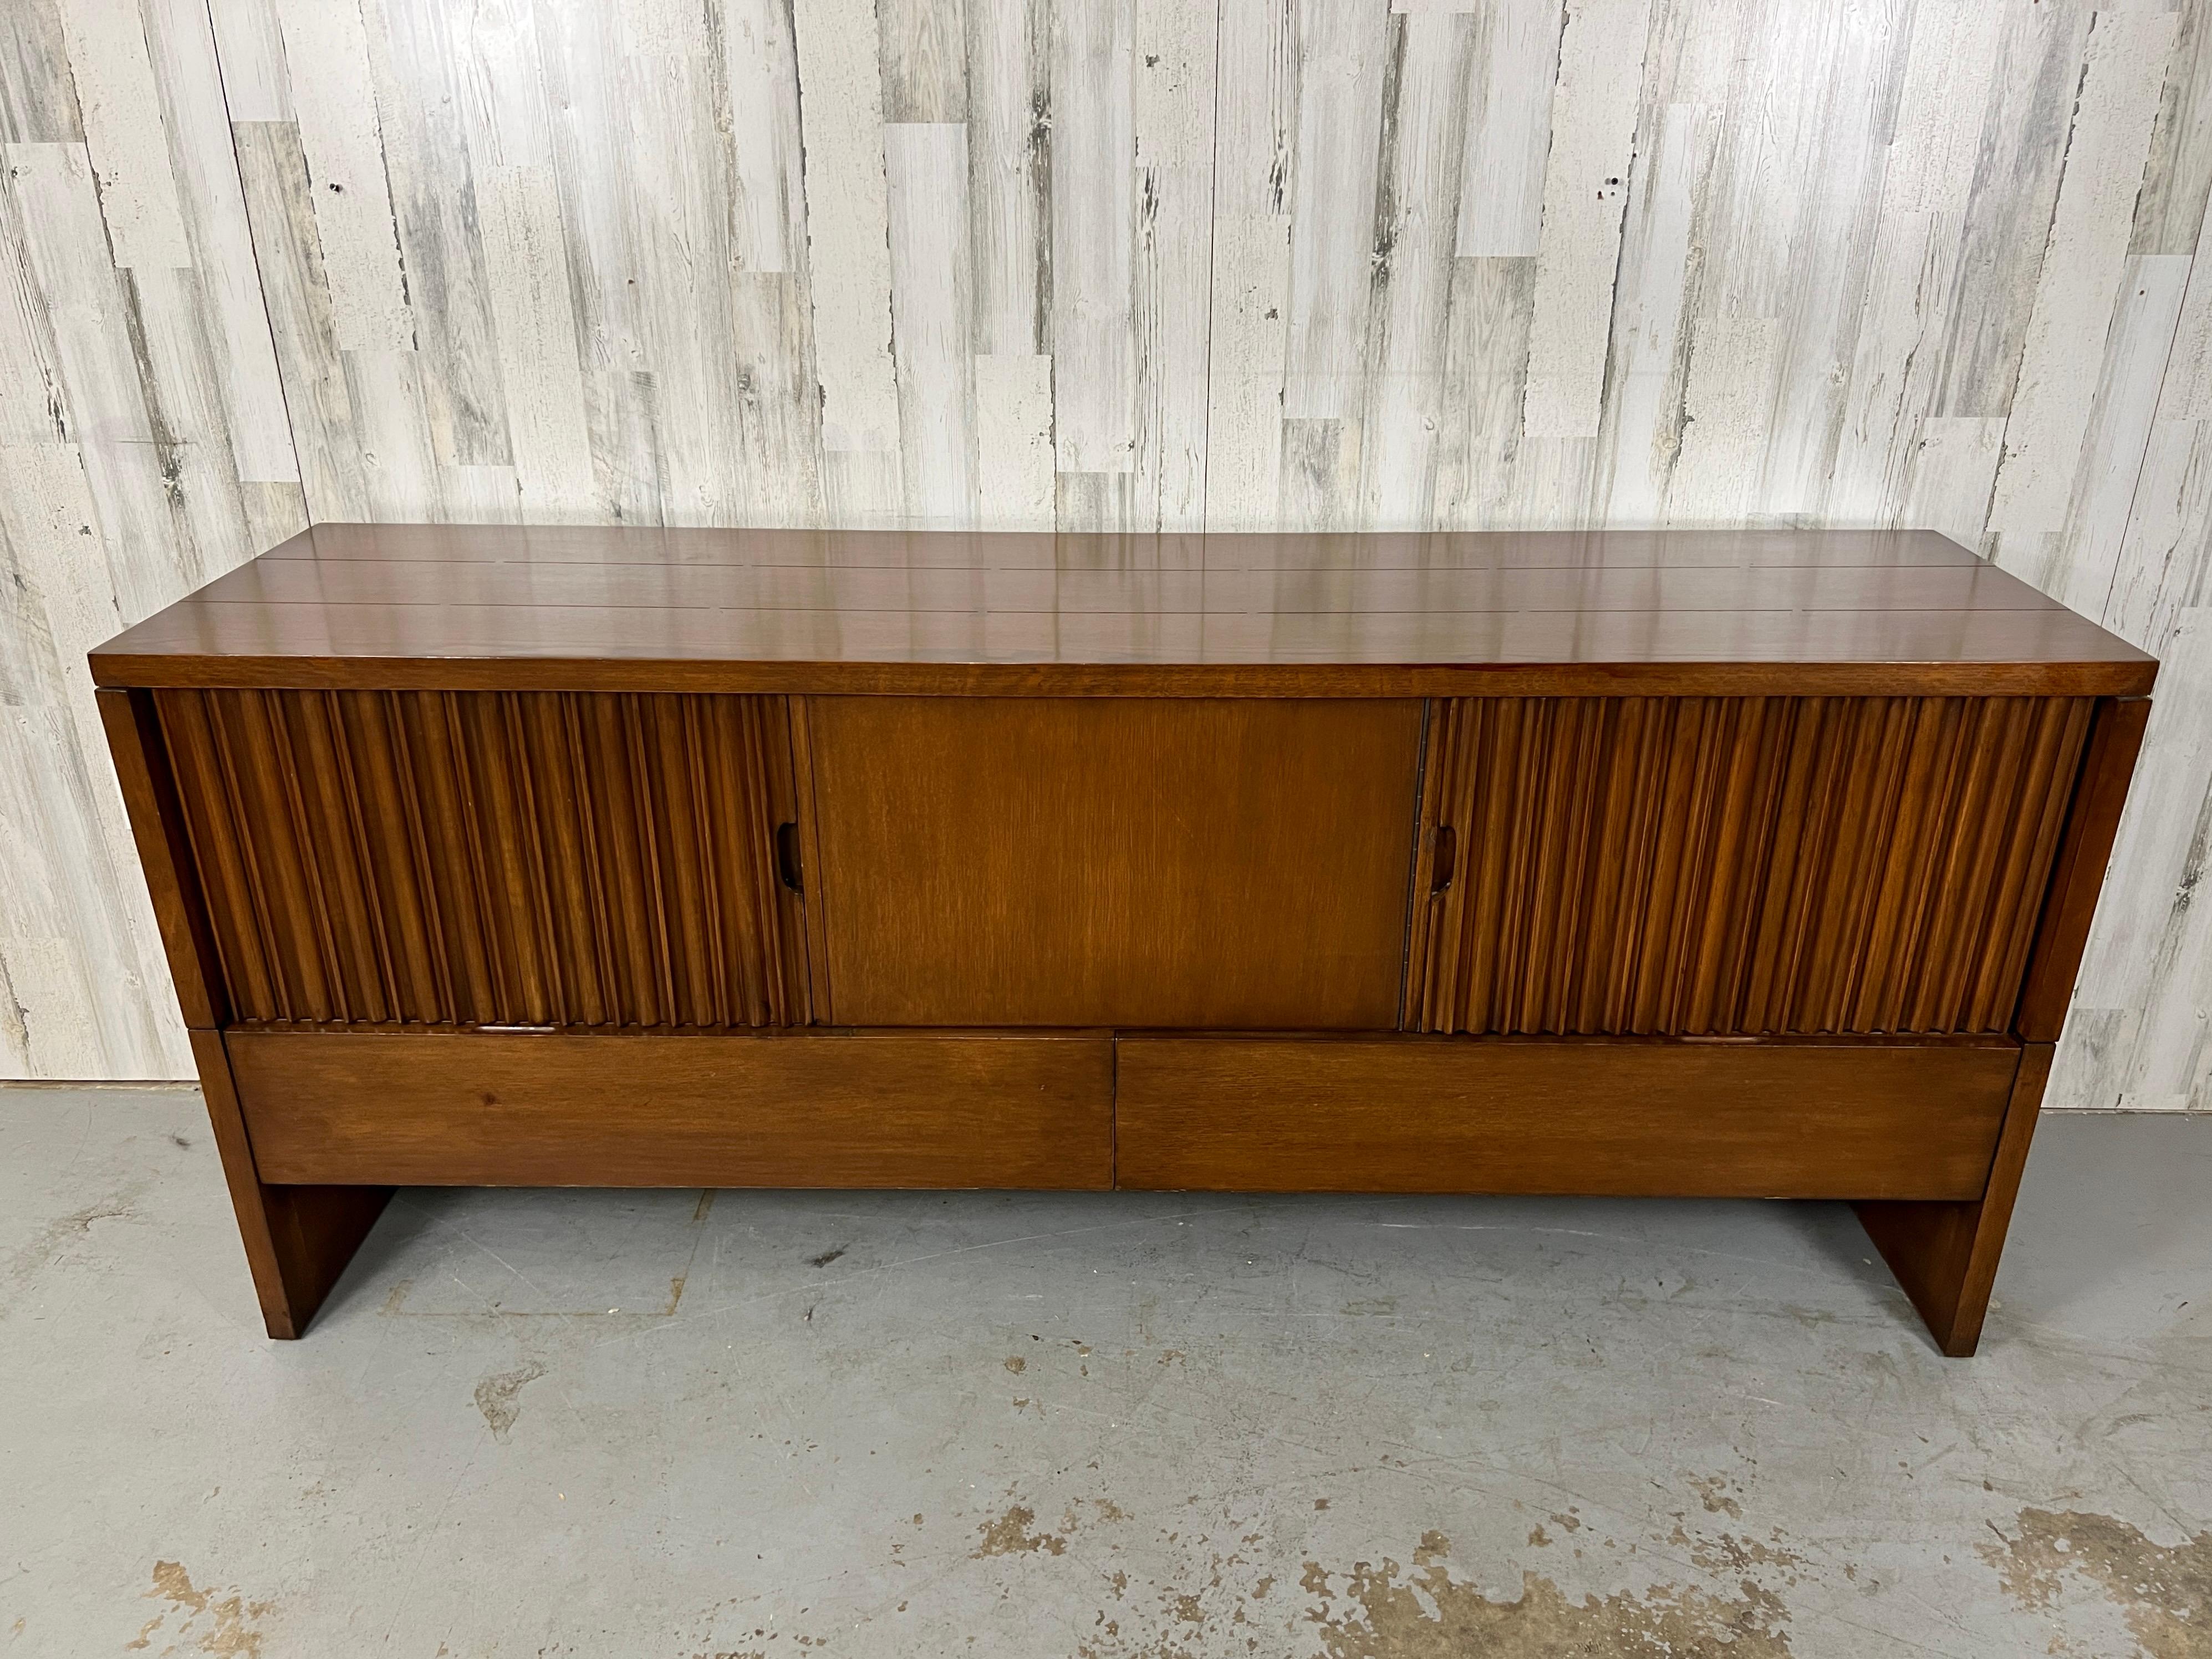 Mid-Century Modern Harold Schwartz for Romweber Buffet. Many storage openings for flatware & china. A unique butterfly joinery- bow-tie design on the top and sides. Very heavy and sturdy piece.